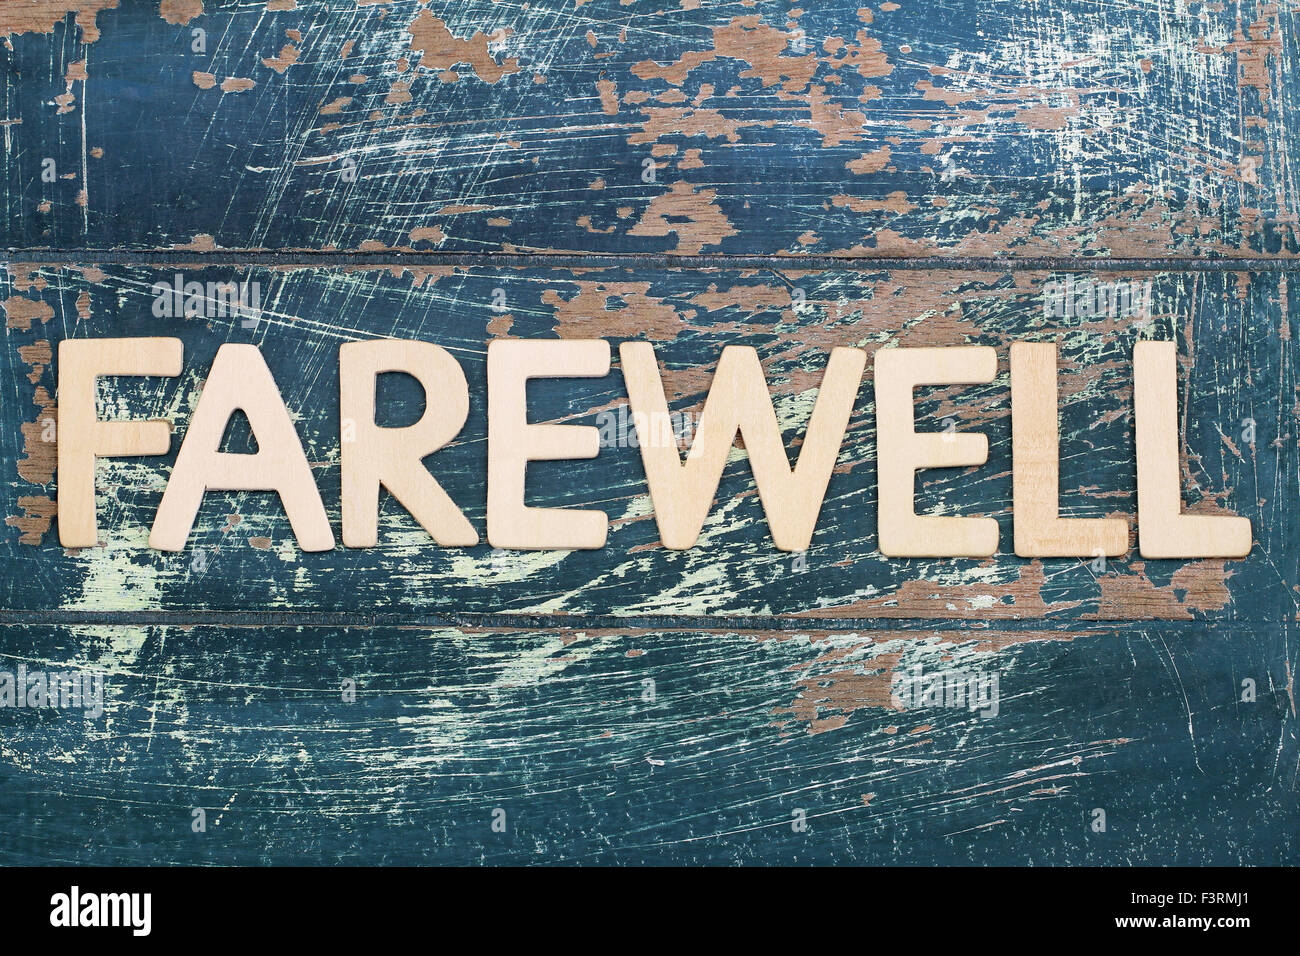 Word farewell written on rustic wooden surface Stock Photo